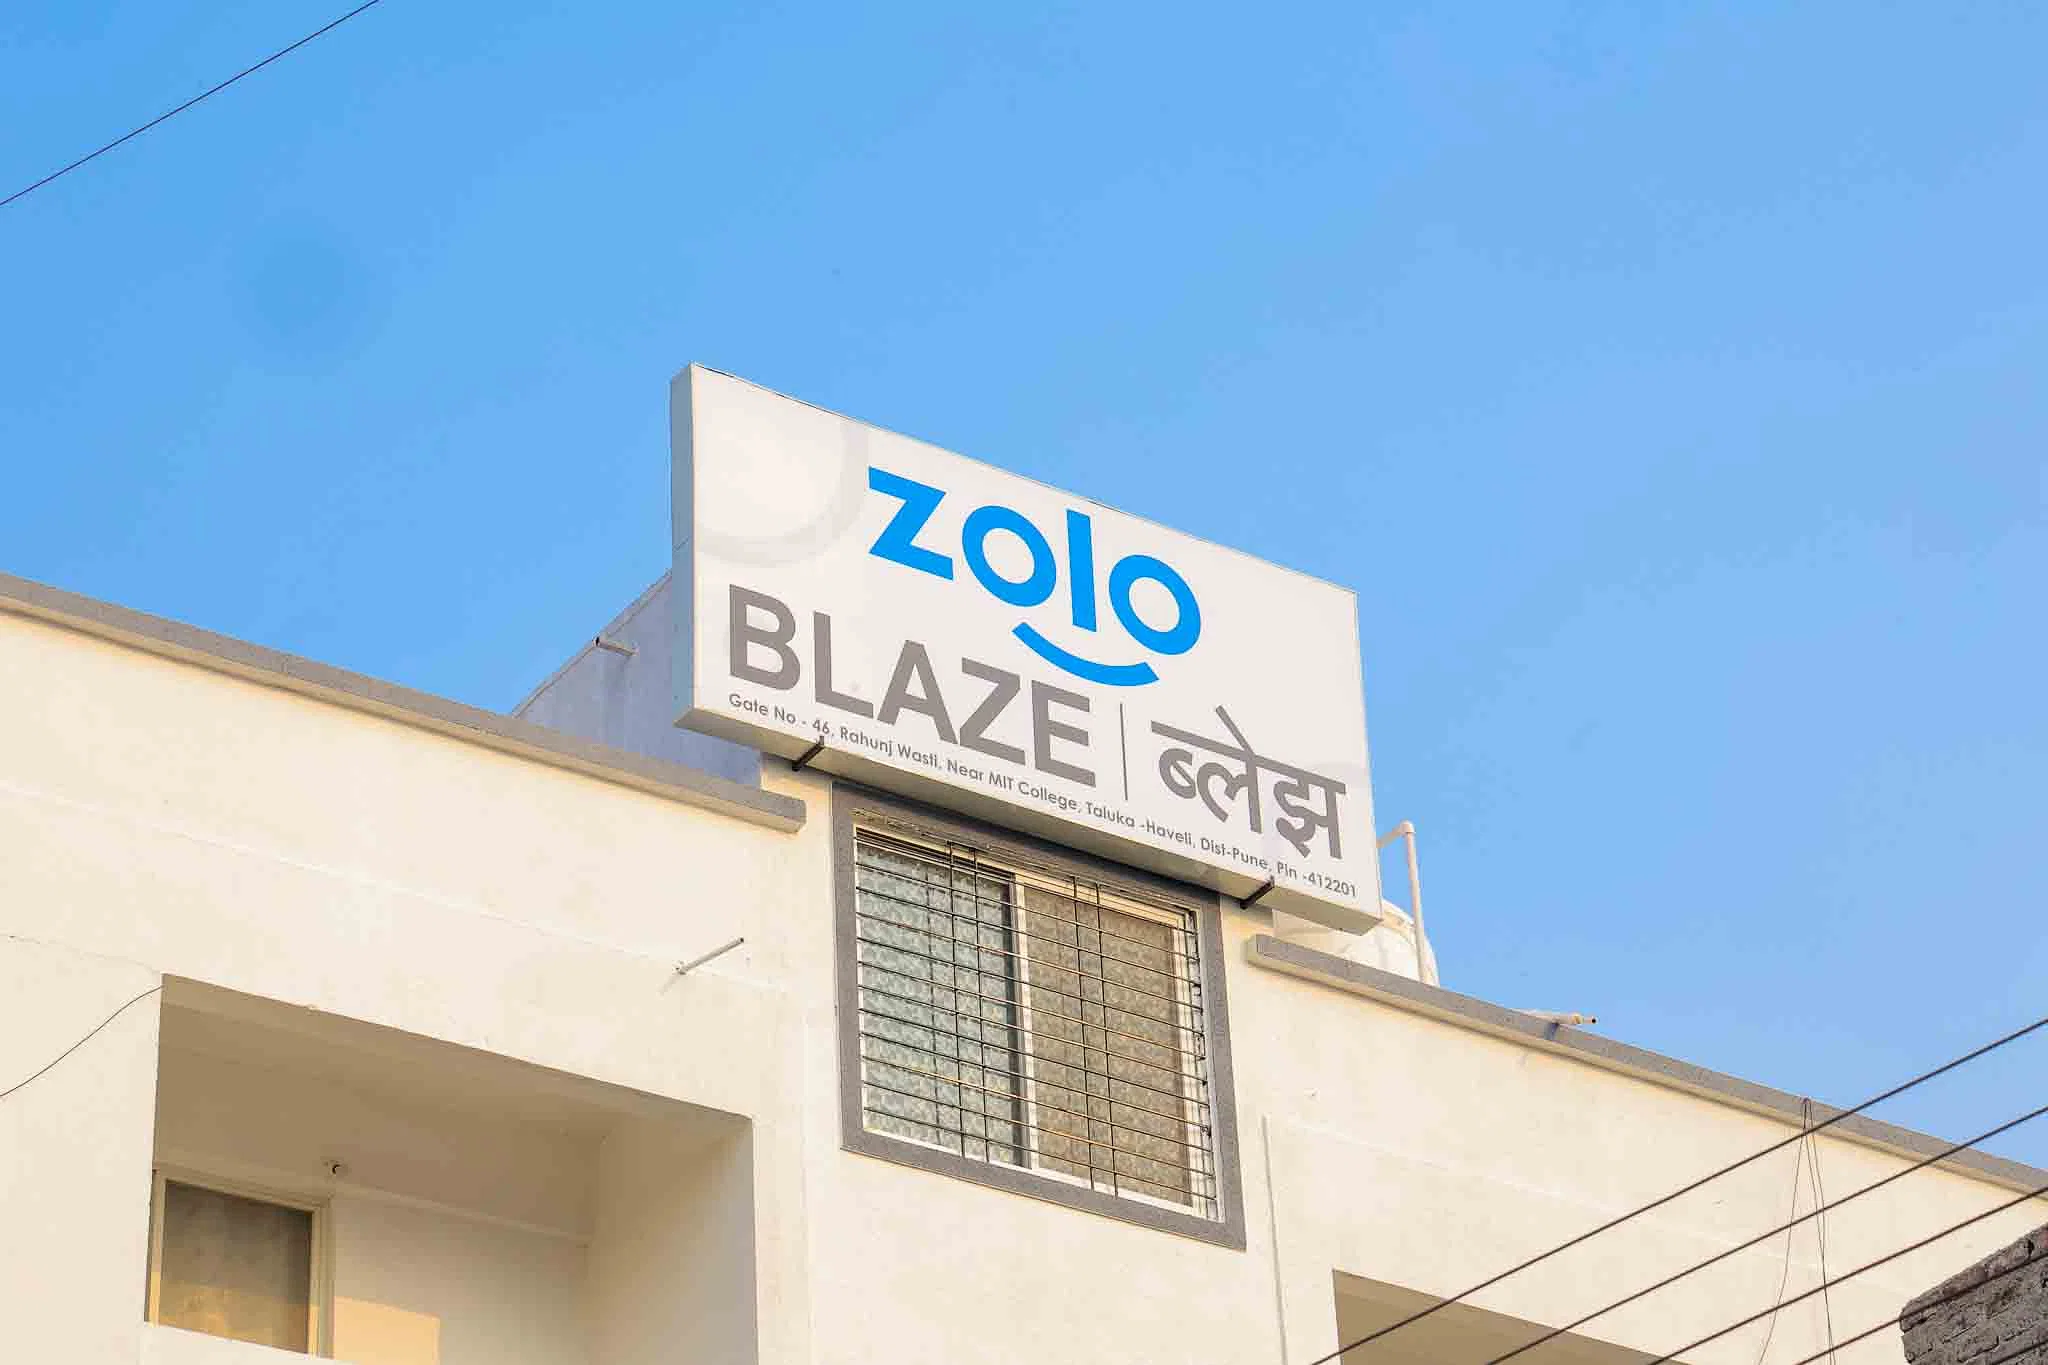 safe and affordable hostels for couple students with 24/7 security and CCTV surveillance-Zolo Blaze